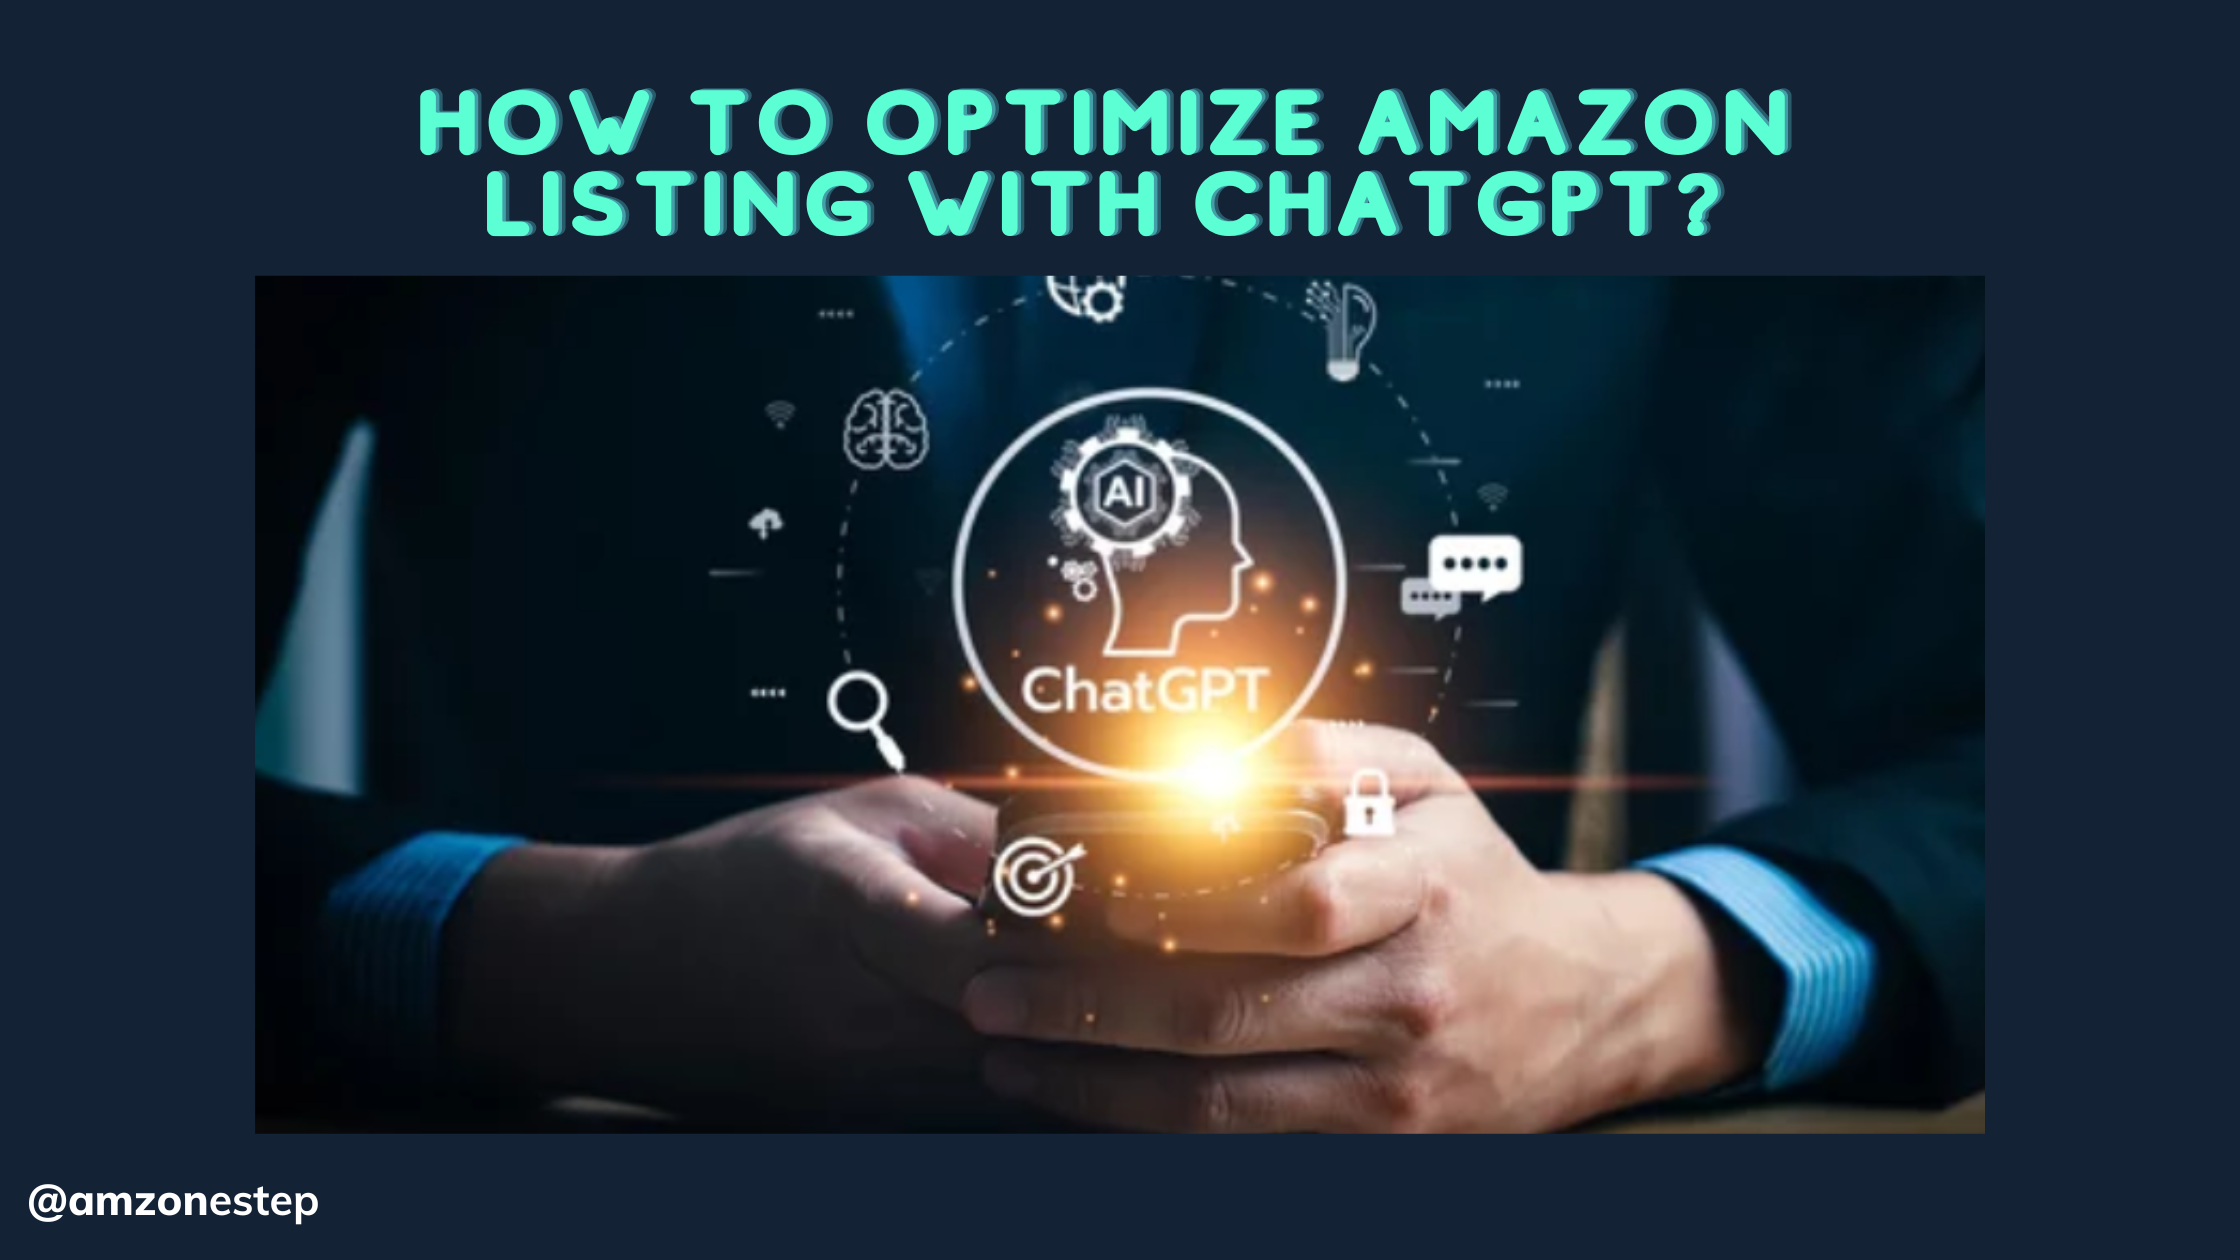 How to Optimize Amazon Listing With ChatGPT?